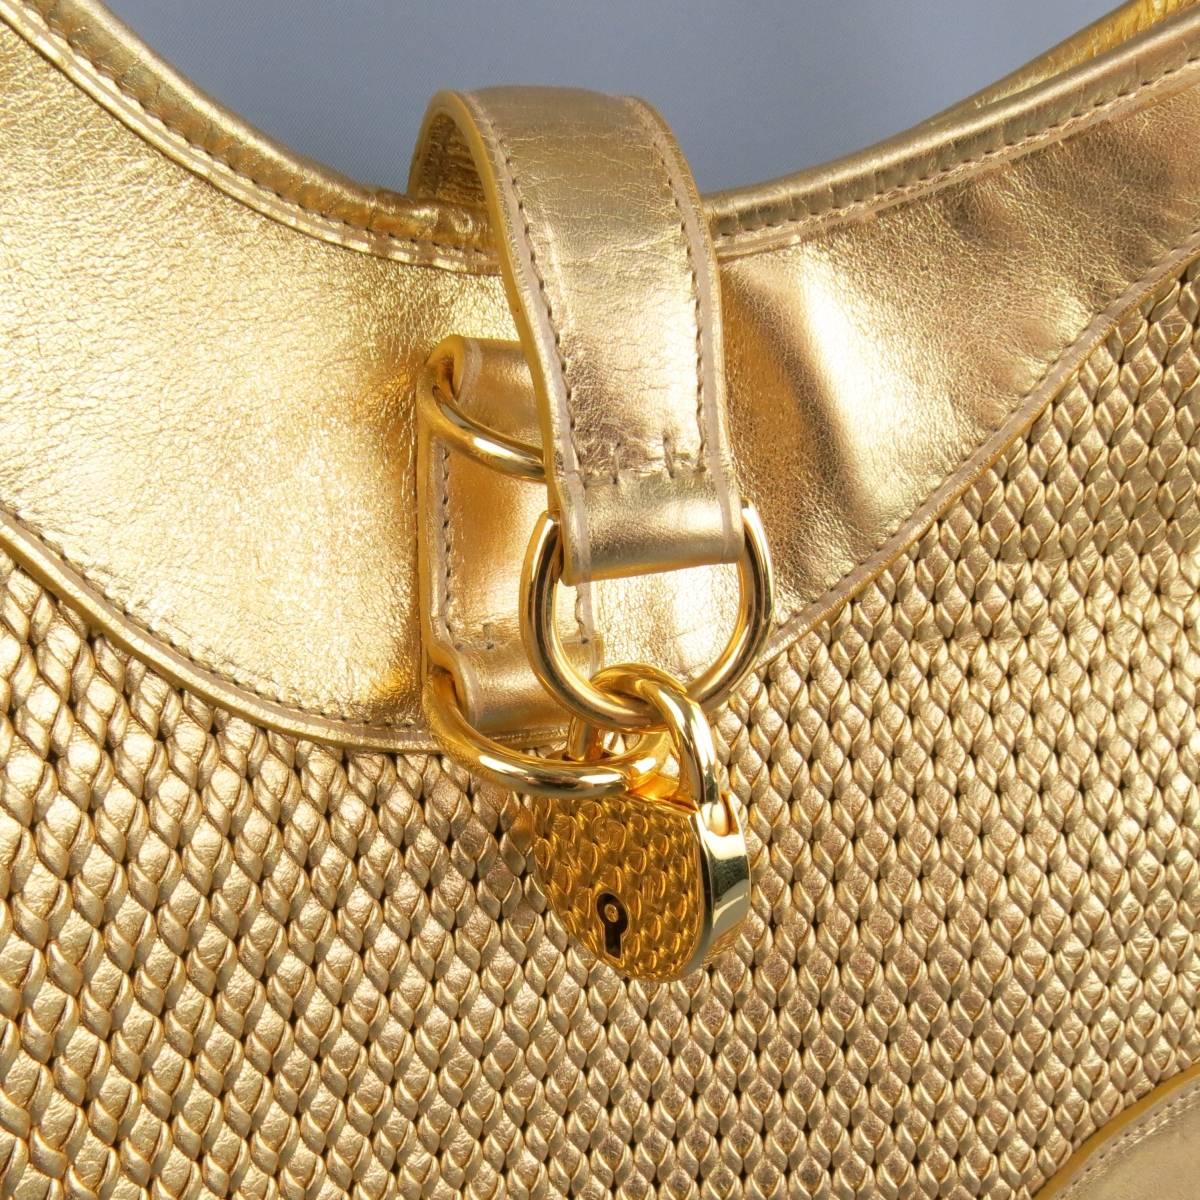 RALPH LAUREN COLLECTION leather metallic gold shoulder bad features a woven texture, embossed 'Ralph Lauren' lock with clochette and two keys. Interior snap pocket. Minor wear on strap. Retails at $1995.00.
 
Excellent Pre-Owned Condition.
